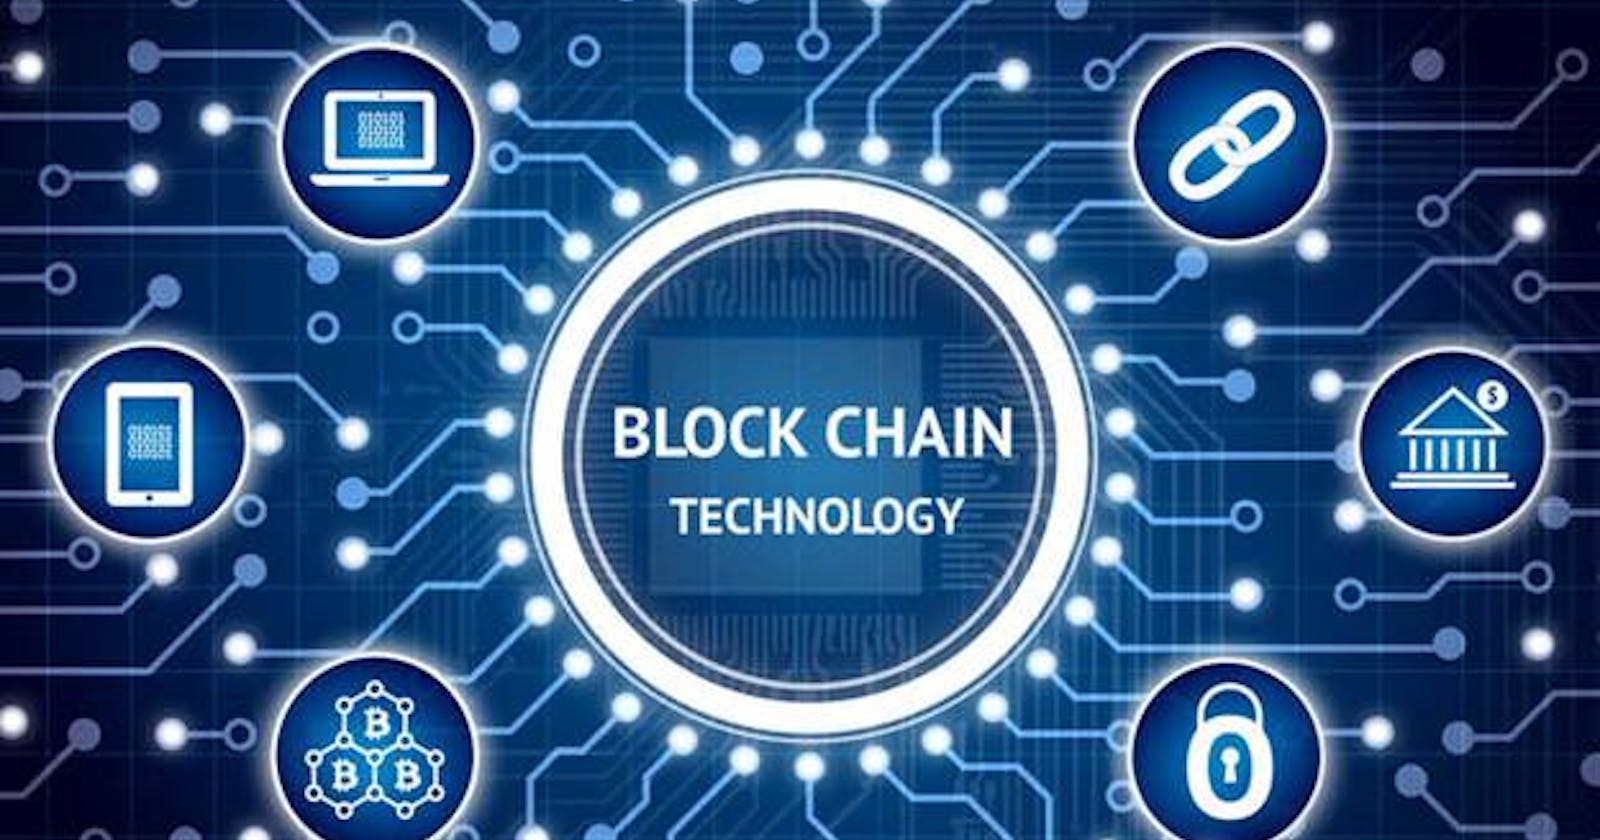 What is blockchain technology and how does it work